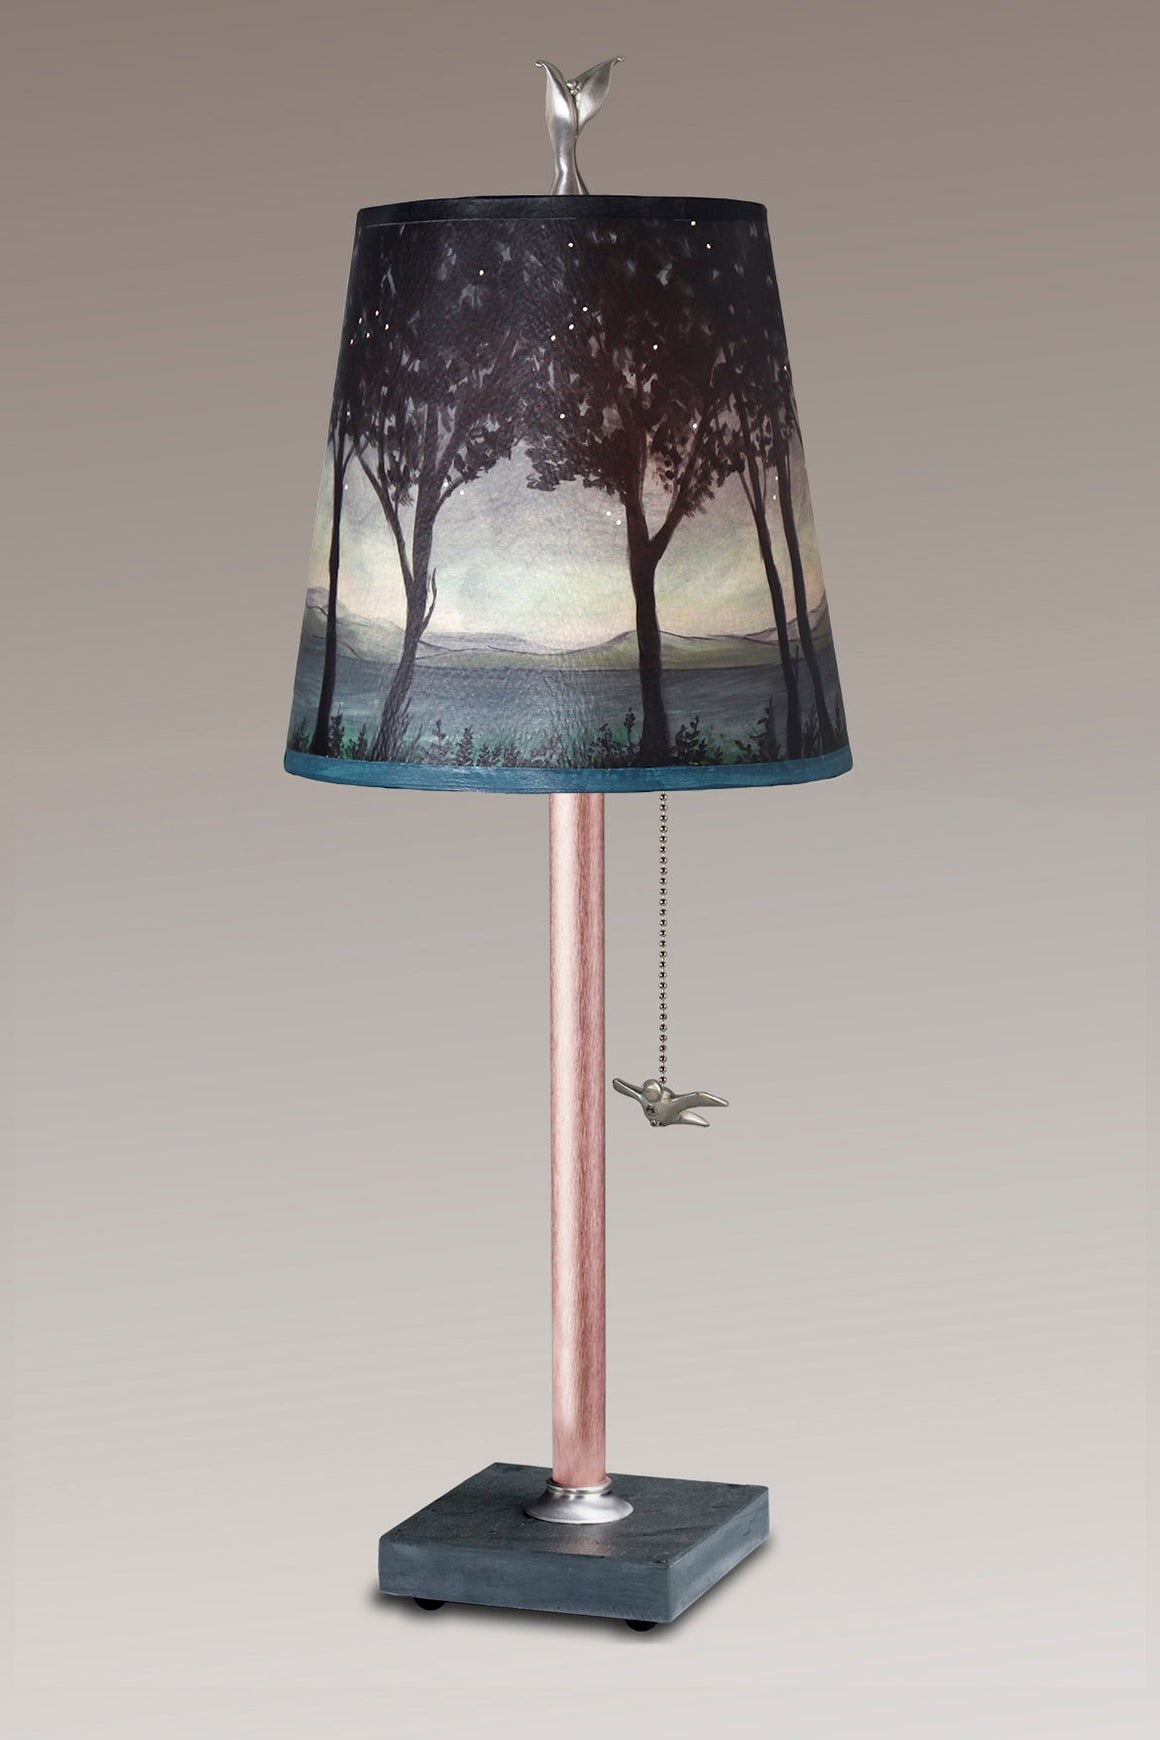 Copper Table Lamp with Small Drum in Twilight